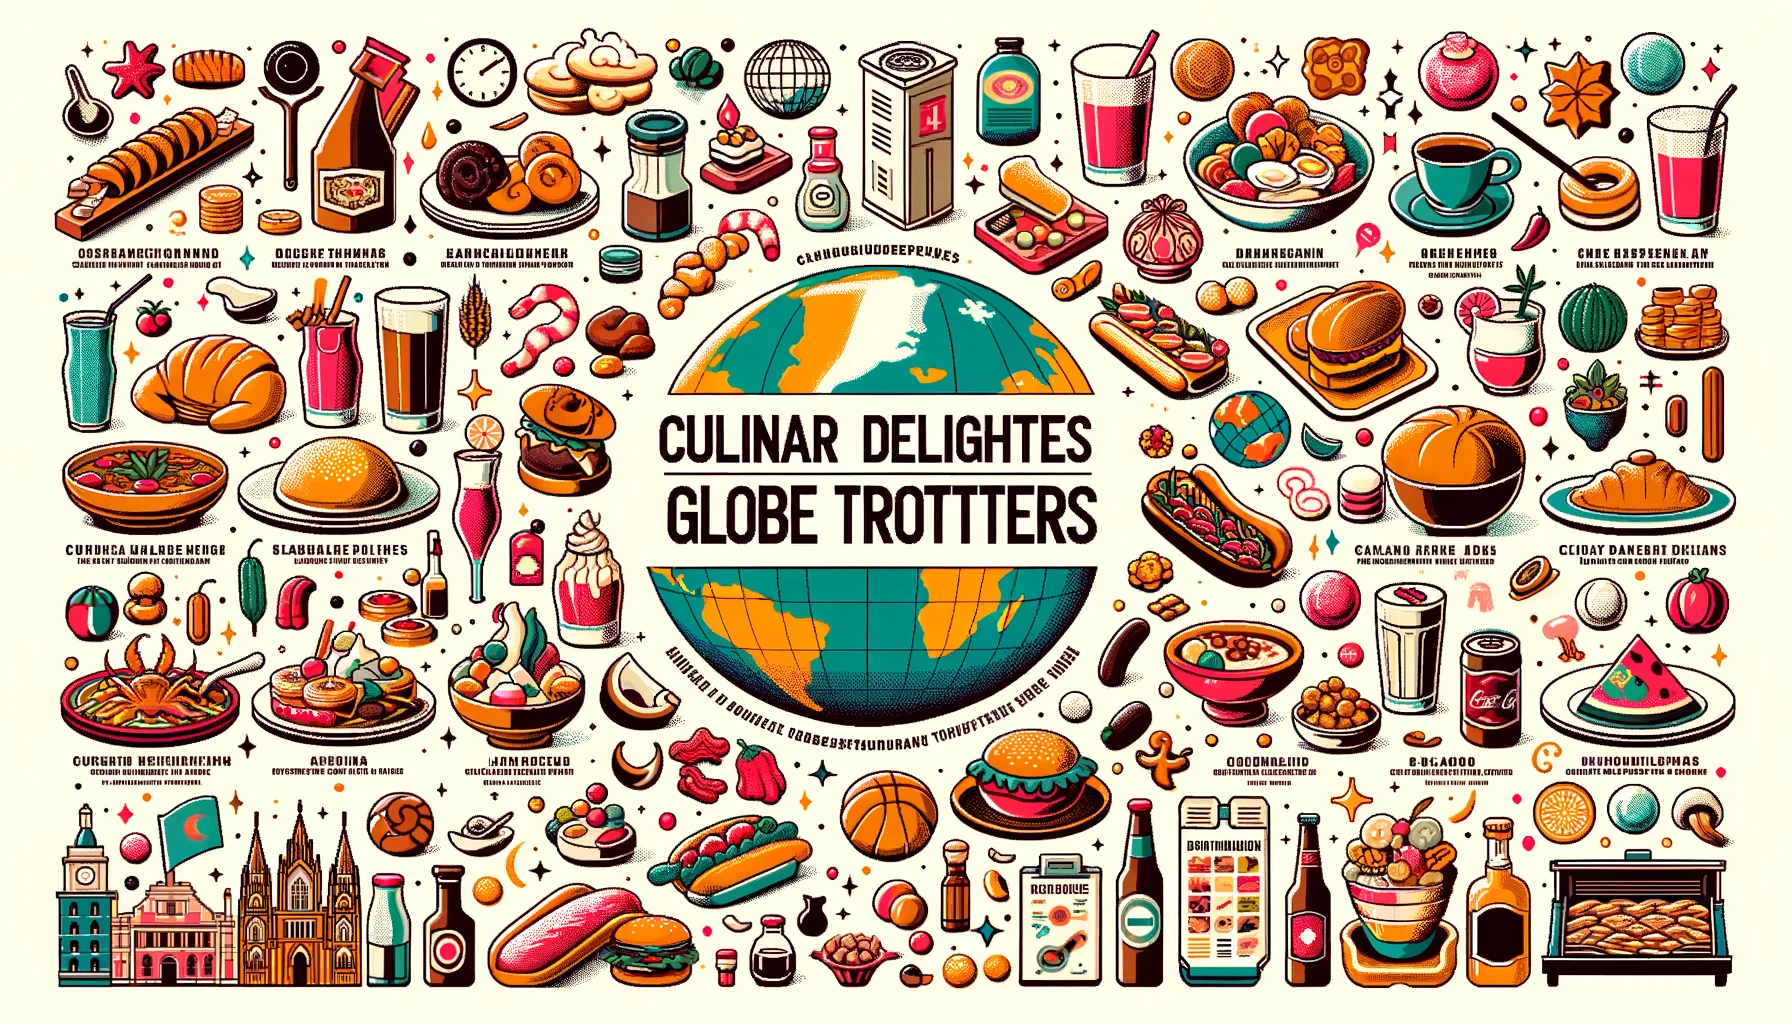 Culinary Delights for Globe Trotters